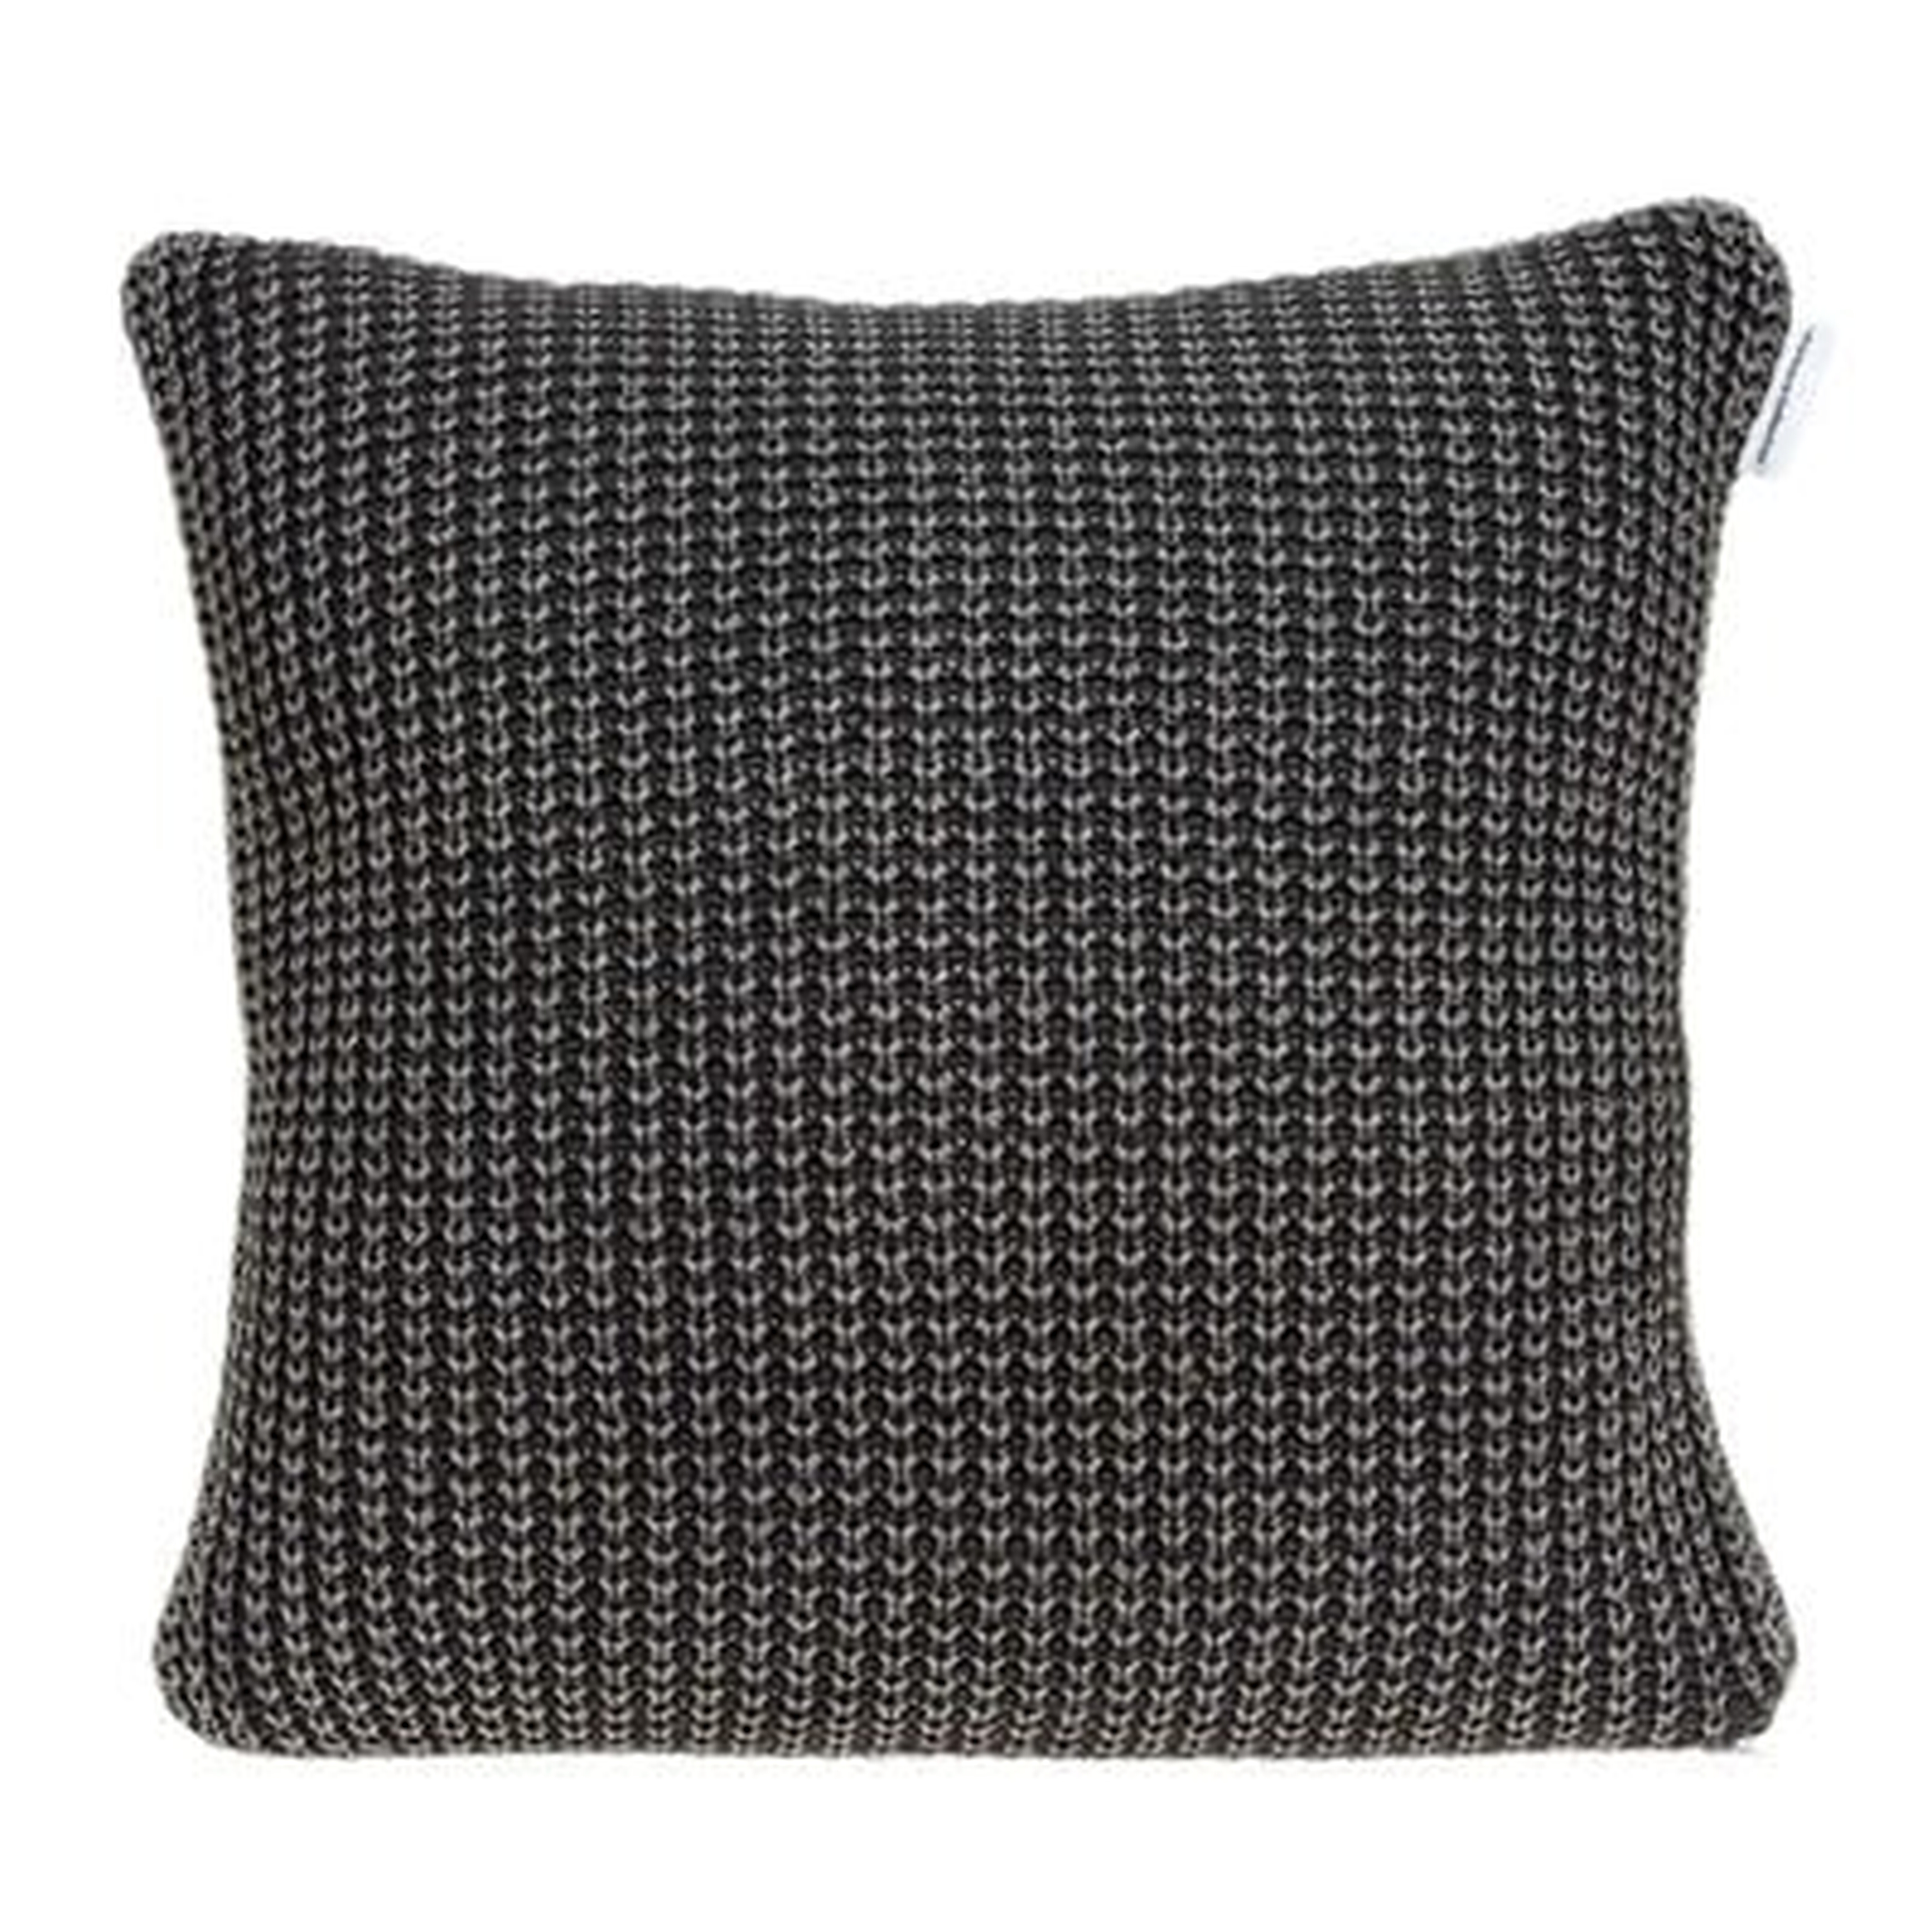 20" X 7" X 20" Transitional Charcoal Pillow Cover With Down Insert - Wayfair